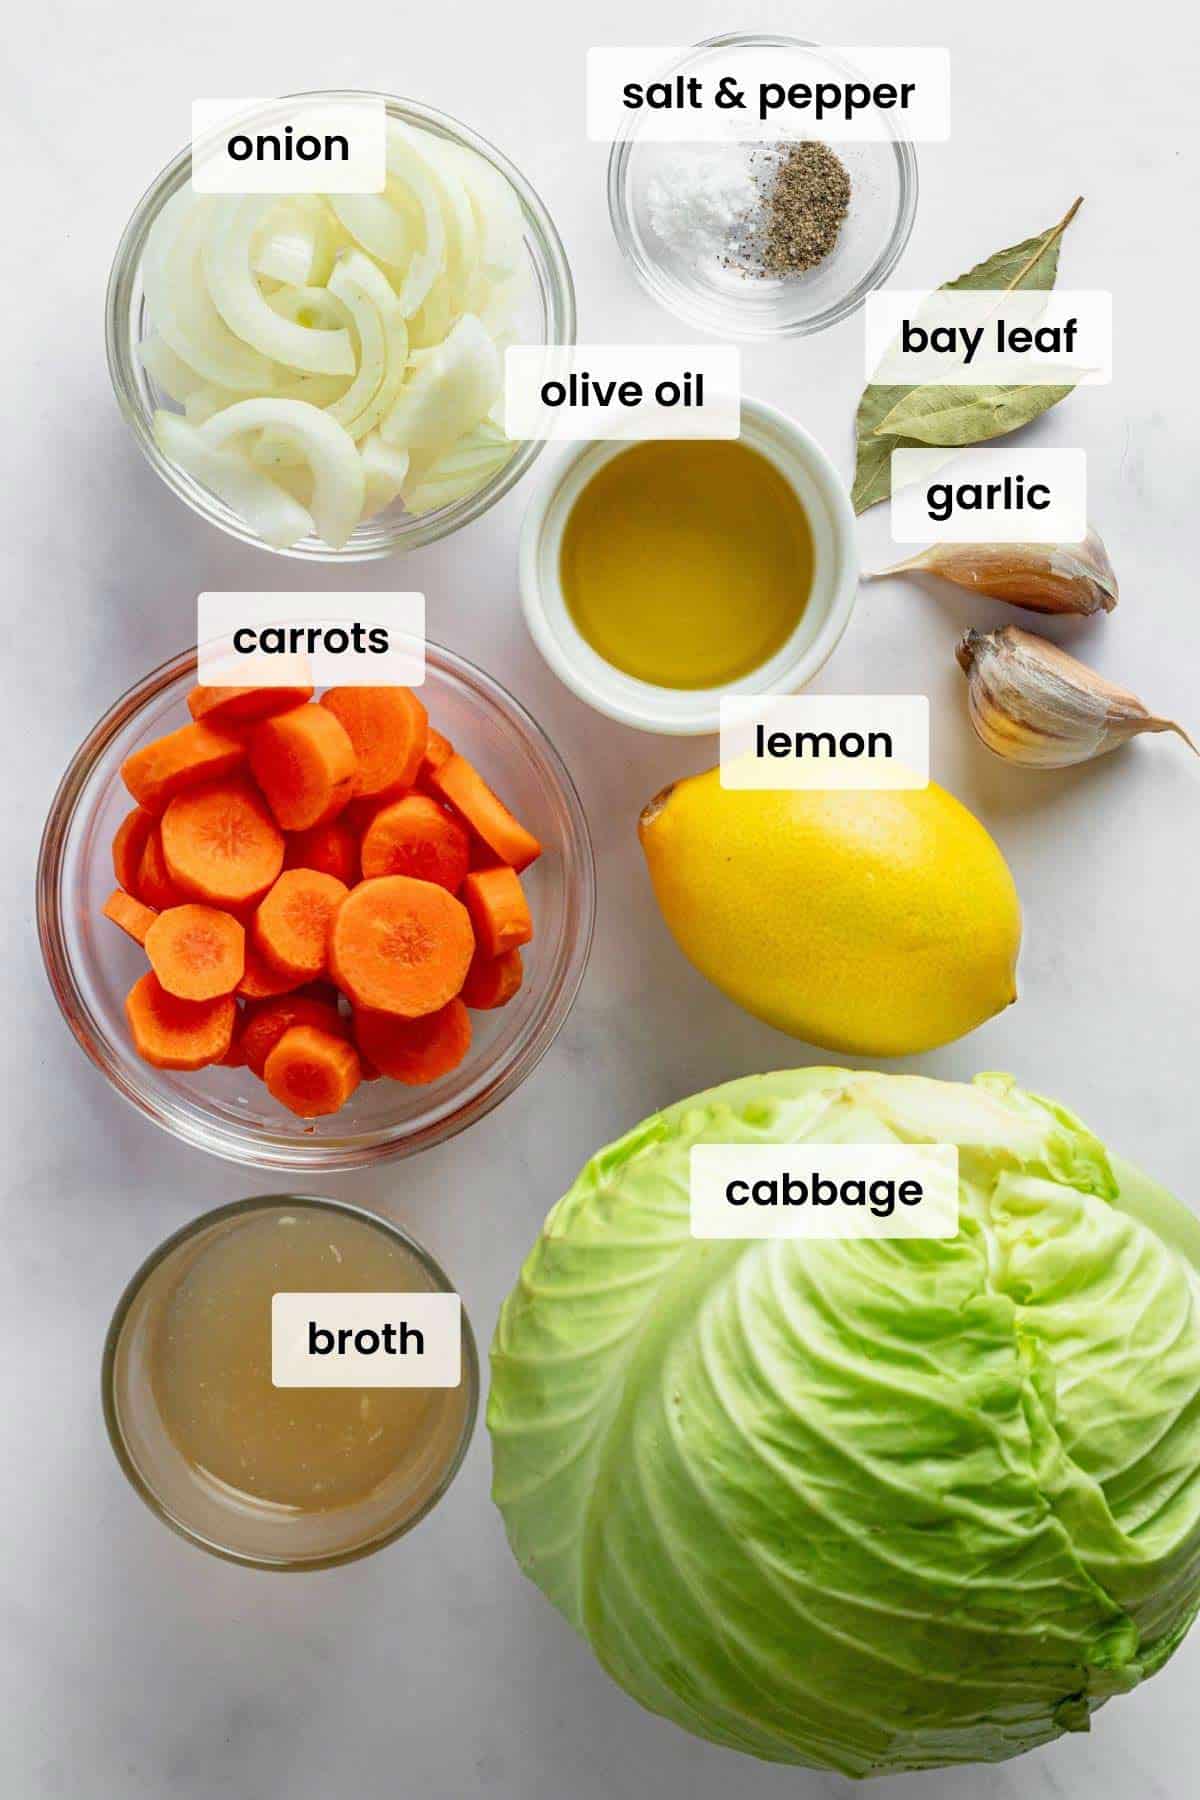 ingredients for braised cabbage.